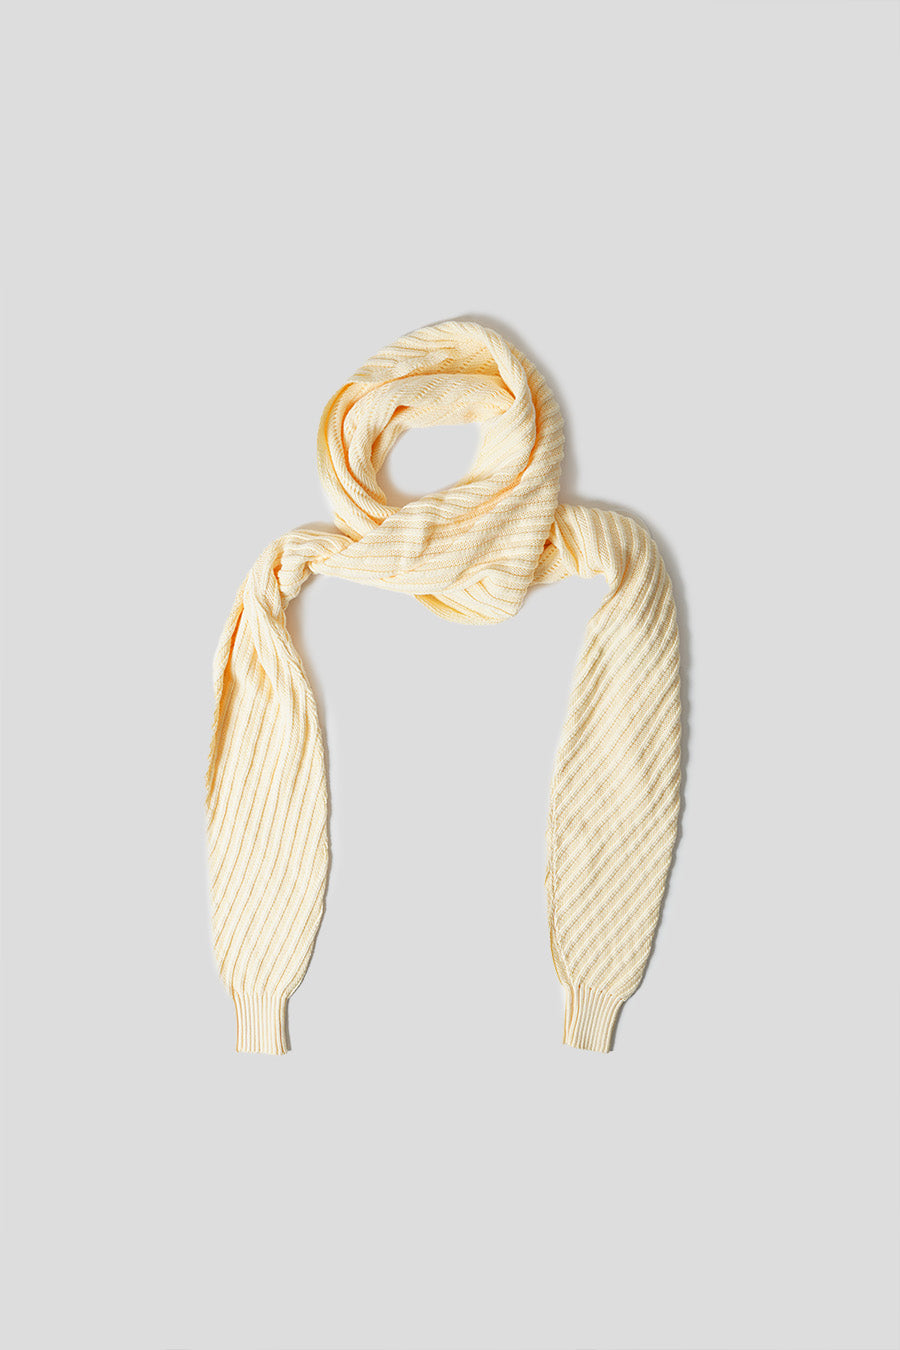 GIMAGUAS - PULL MARIANNE MANGAS BEIGE - LE LABO STORE